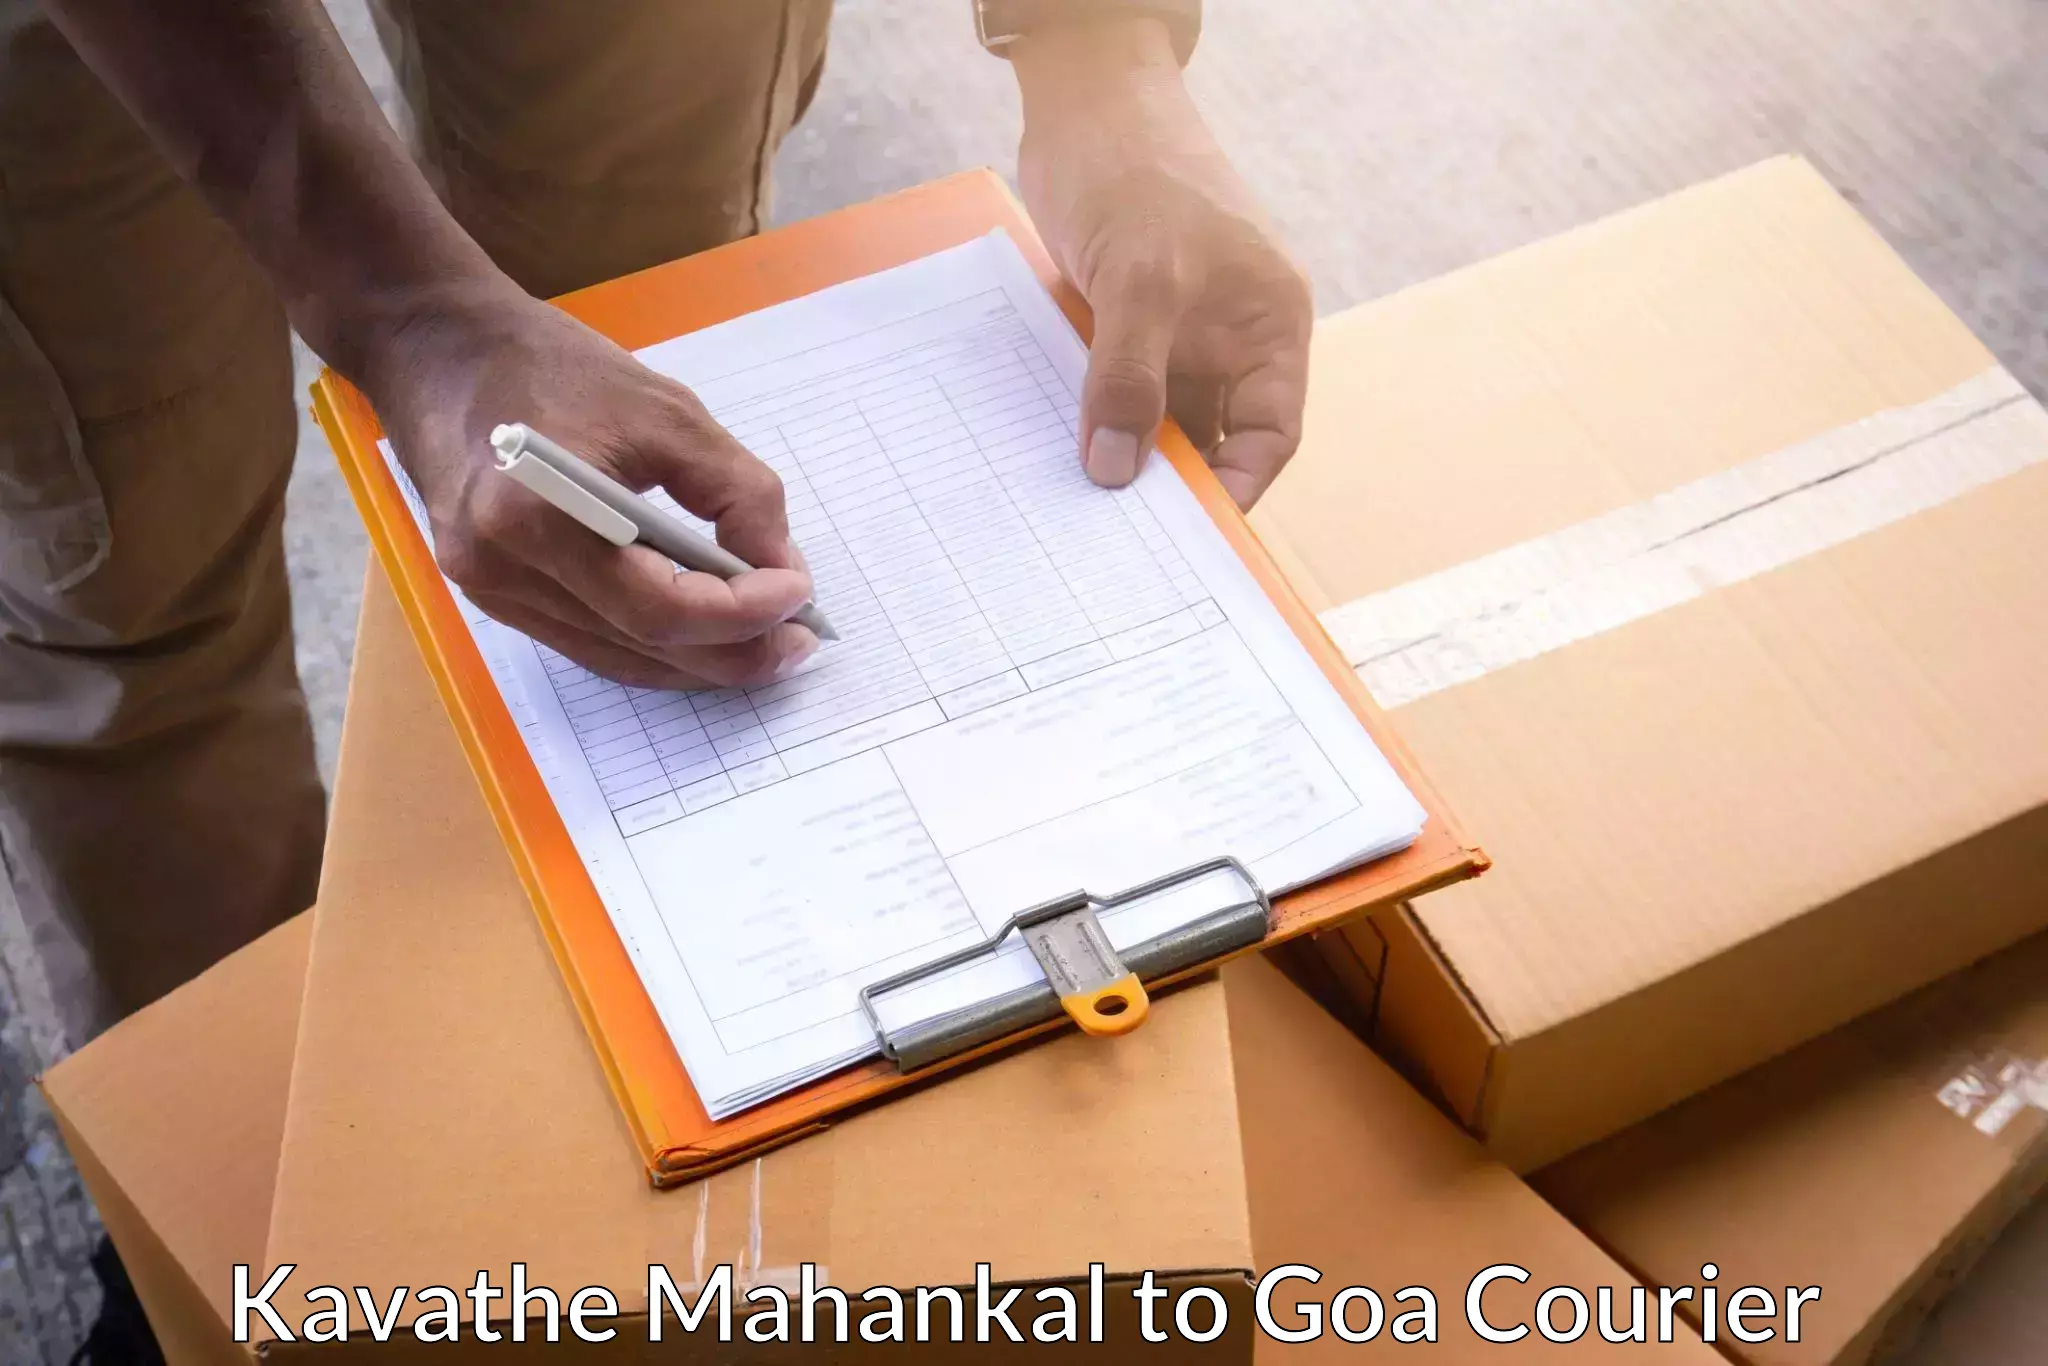 Reliable courier services in Kavathe Mahankal to Vasco da Gama